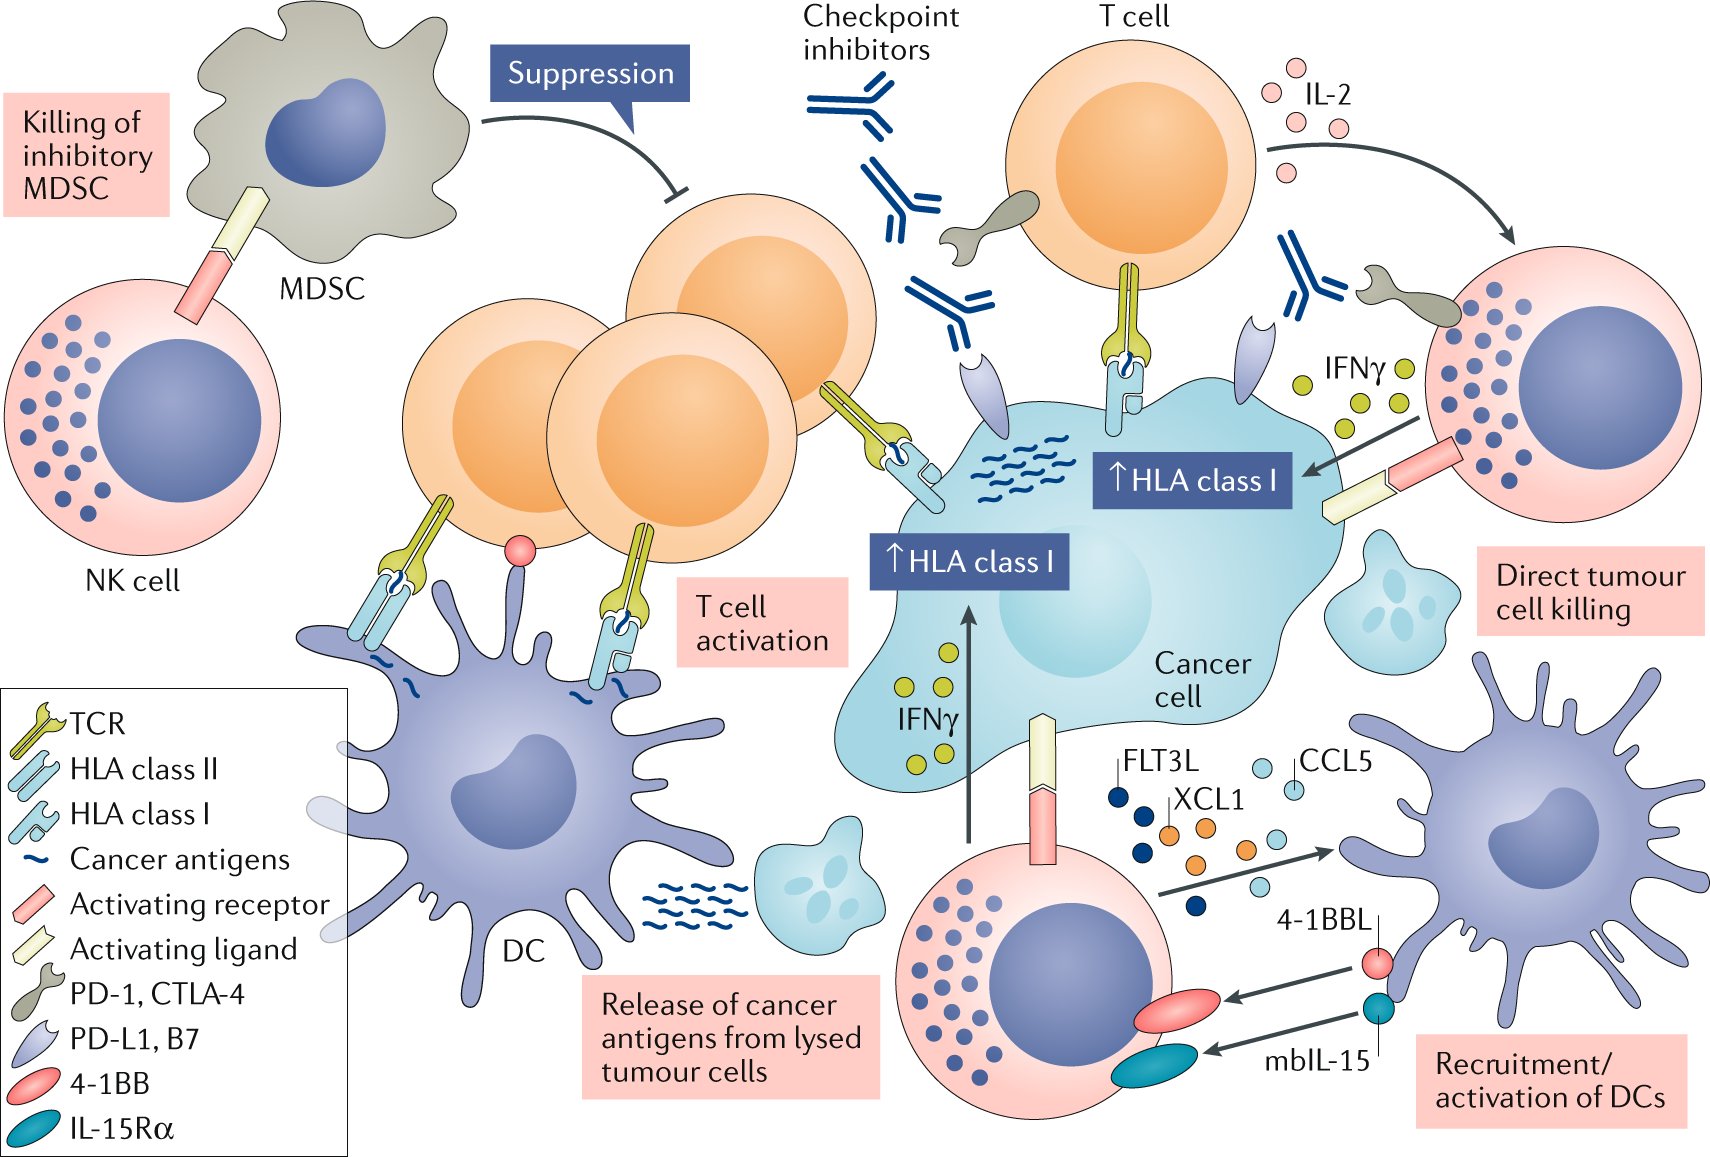 Nature Reviews Drug Discovery on Twitter: "For on NK cells in cancer immunotherapy, here's a recent review https://t.co/PrMD8aPqHy https://t.co/IQ0MVsTCFl" / Twitter